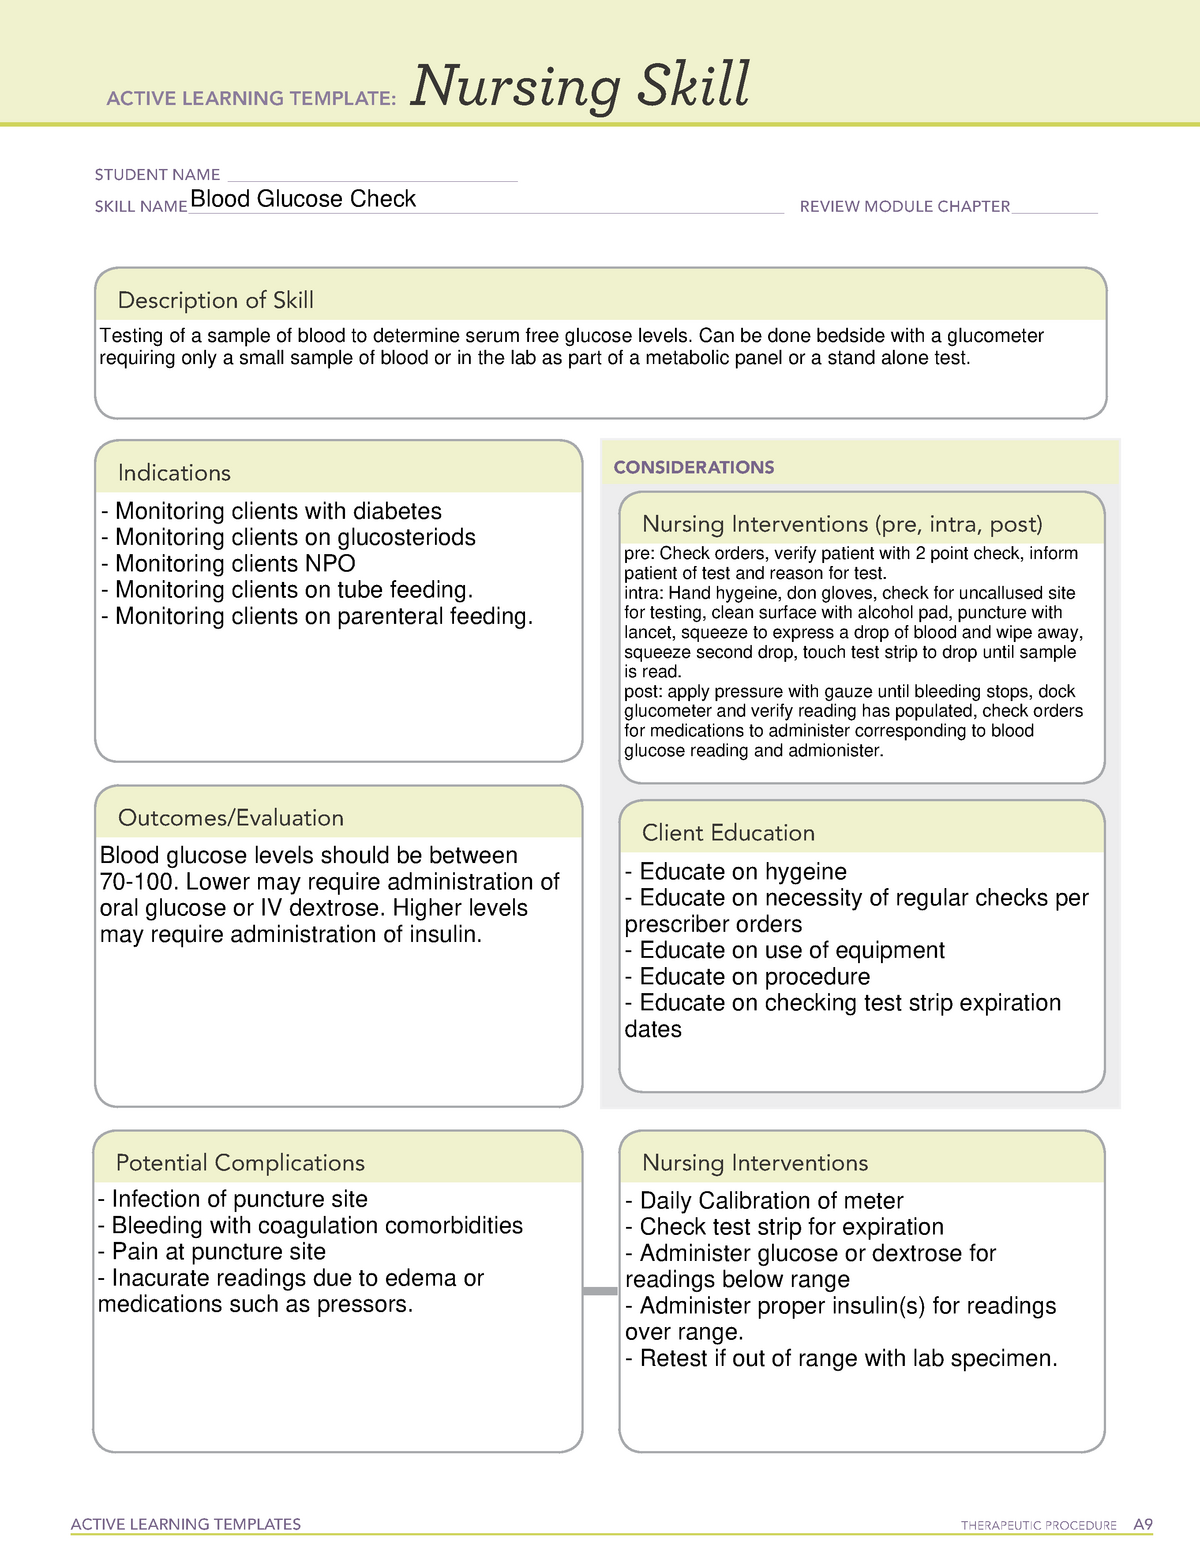 blood-glucose-check-nursing-skill-template-active-learning-templates-therapeutic-procedure-a